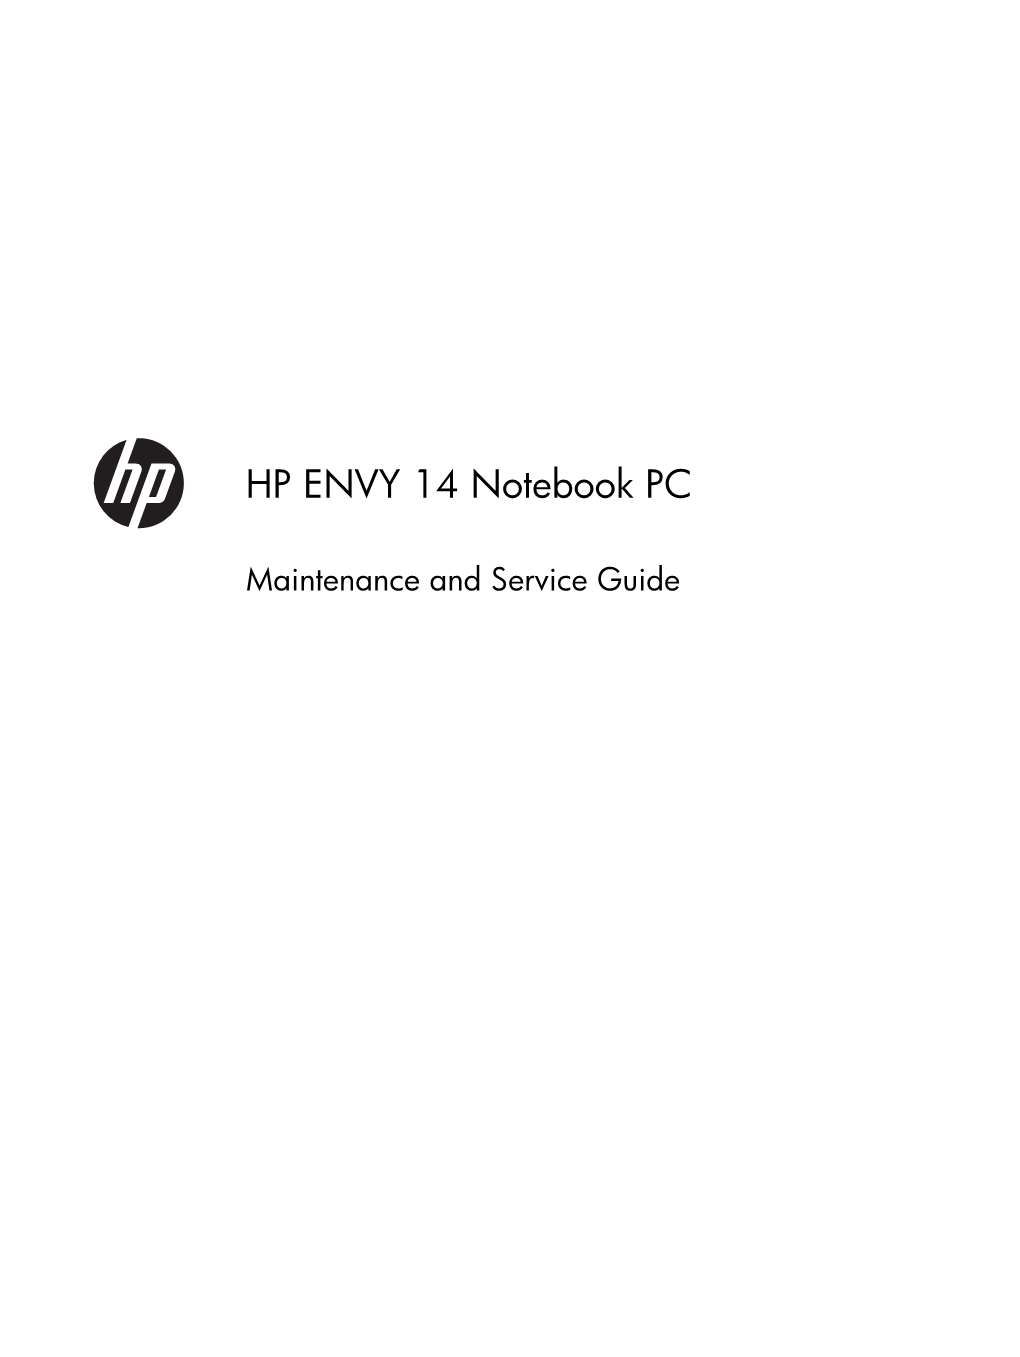 HP ENVY 14 Notebook PC